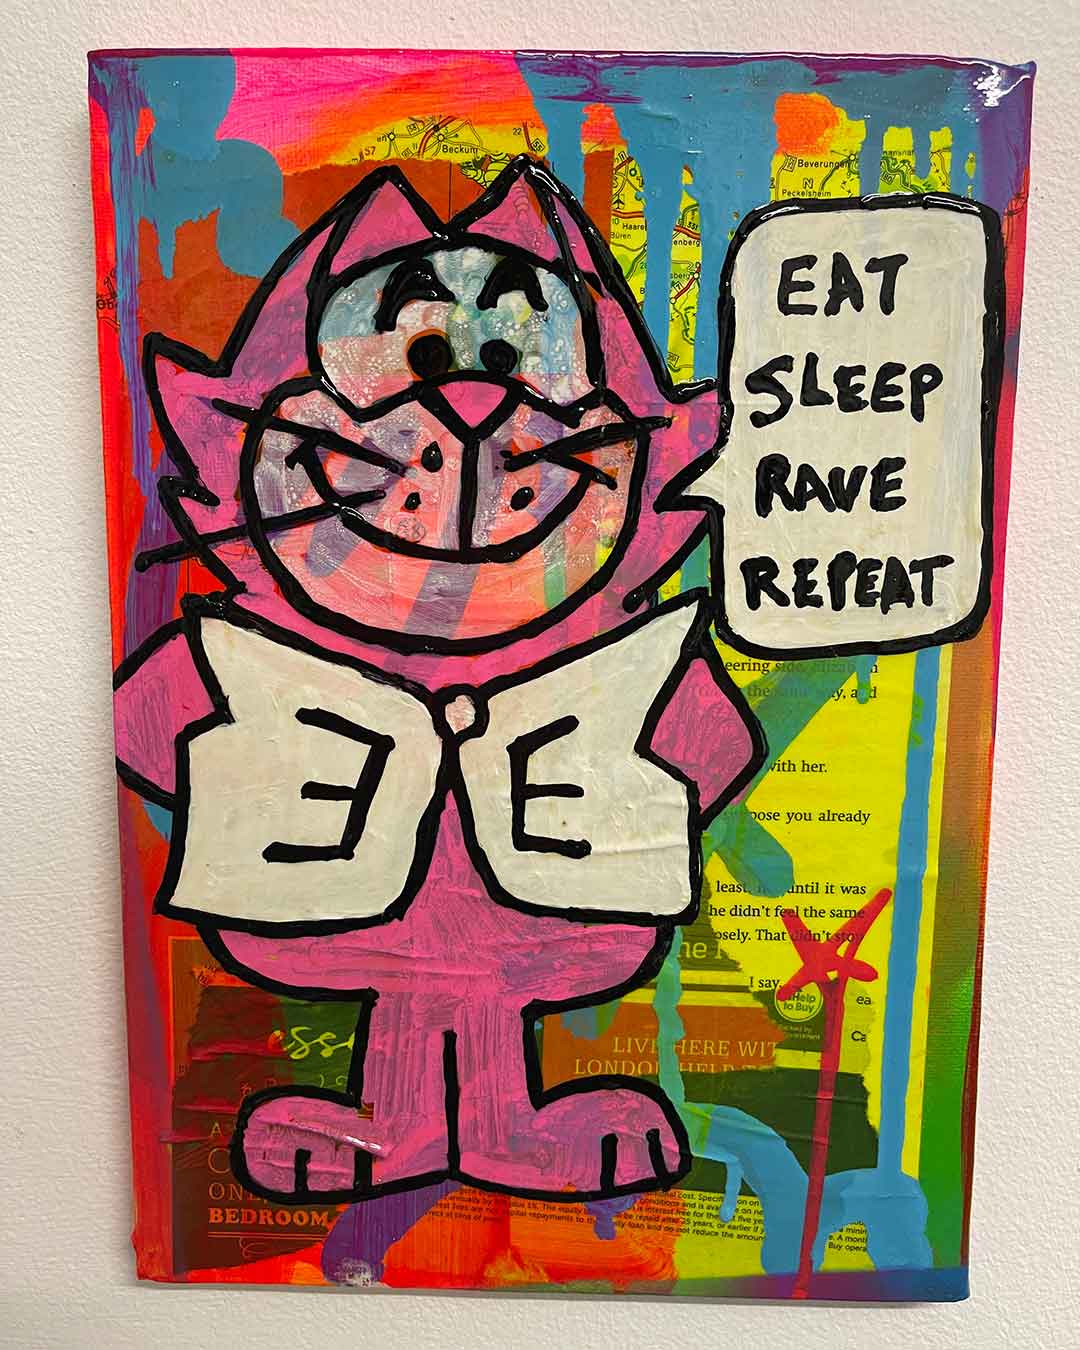 Eat Sleep Rave Repeat Painting by Barrie J Davies 2022, Mixed media on Canvas, 21cm x 29cm, Unframed and ready to hang. Buy online with free delivery worldwide.